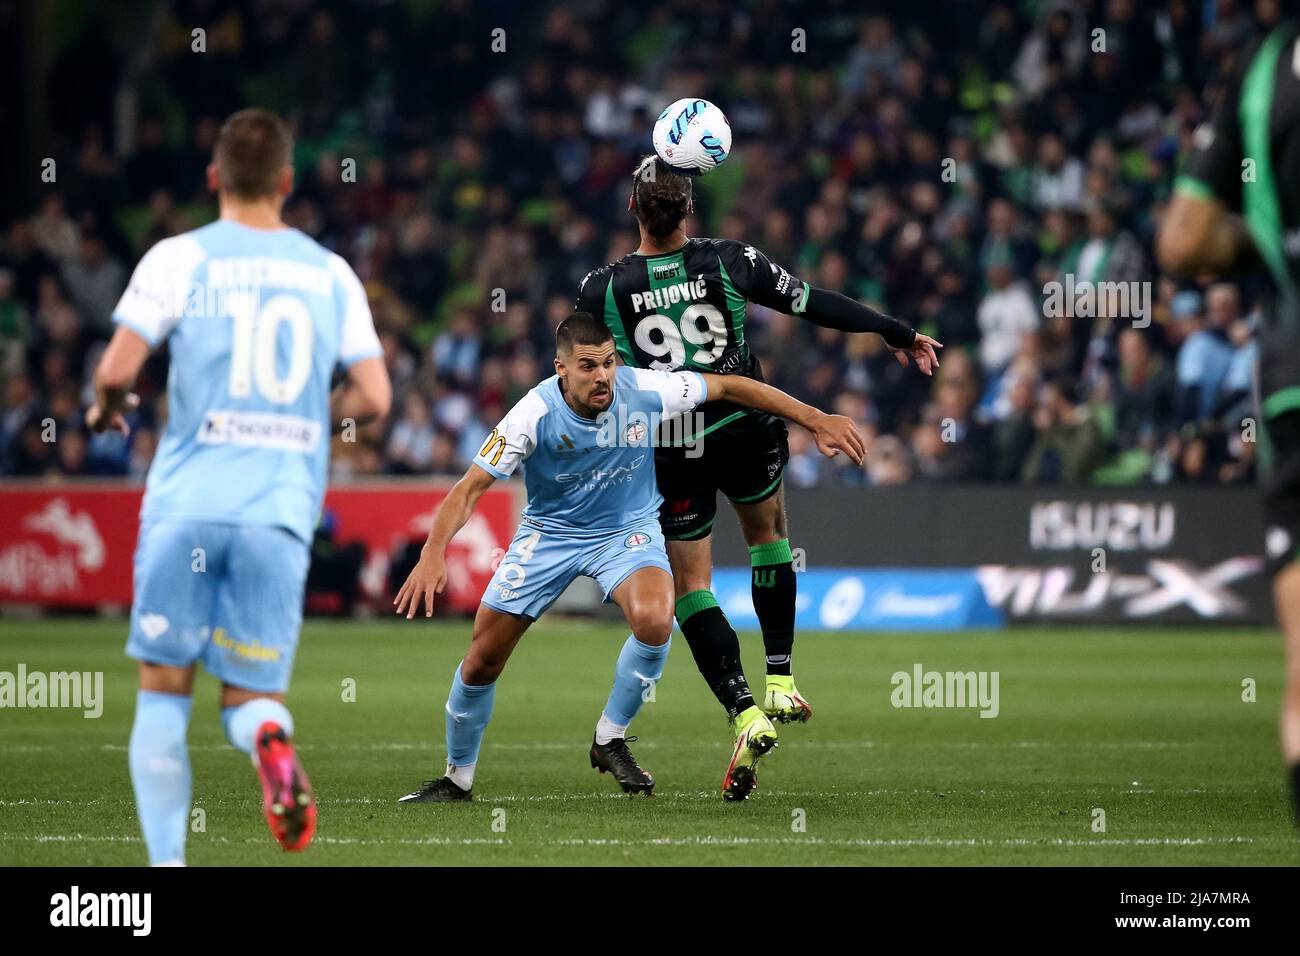 Melbourne, Australia, 28 May, 2022. Aleksandar Prijovic of Western United heads the ball Aleksandar Prijovic of Western United heads the ball during the A-League Grand Final soccer match between Melbourne City FC and Western United at AAMI Park on May 28, 2022 in Melbourne, Australia. Credit: Dave Hewison/Speed Media/Alamy Live News Stock Photo